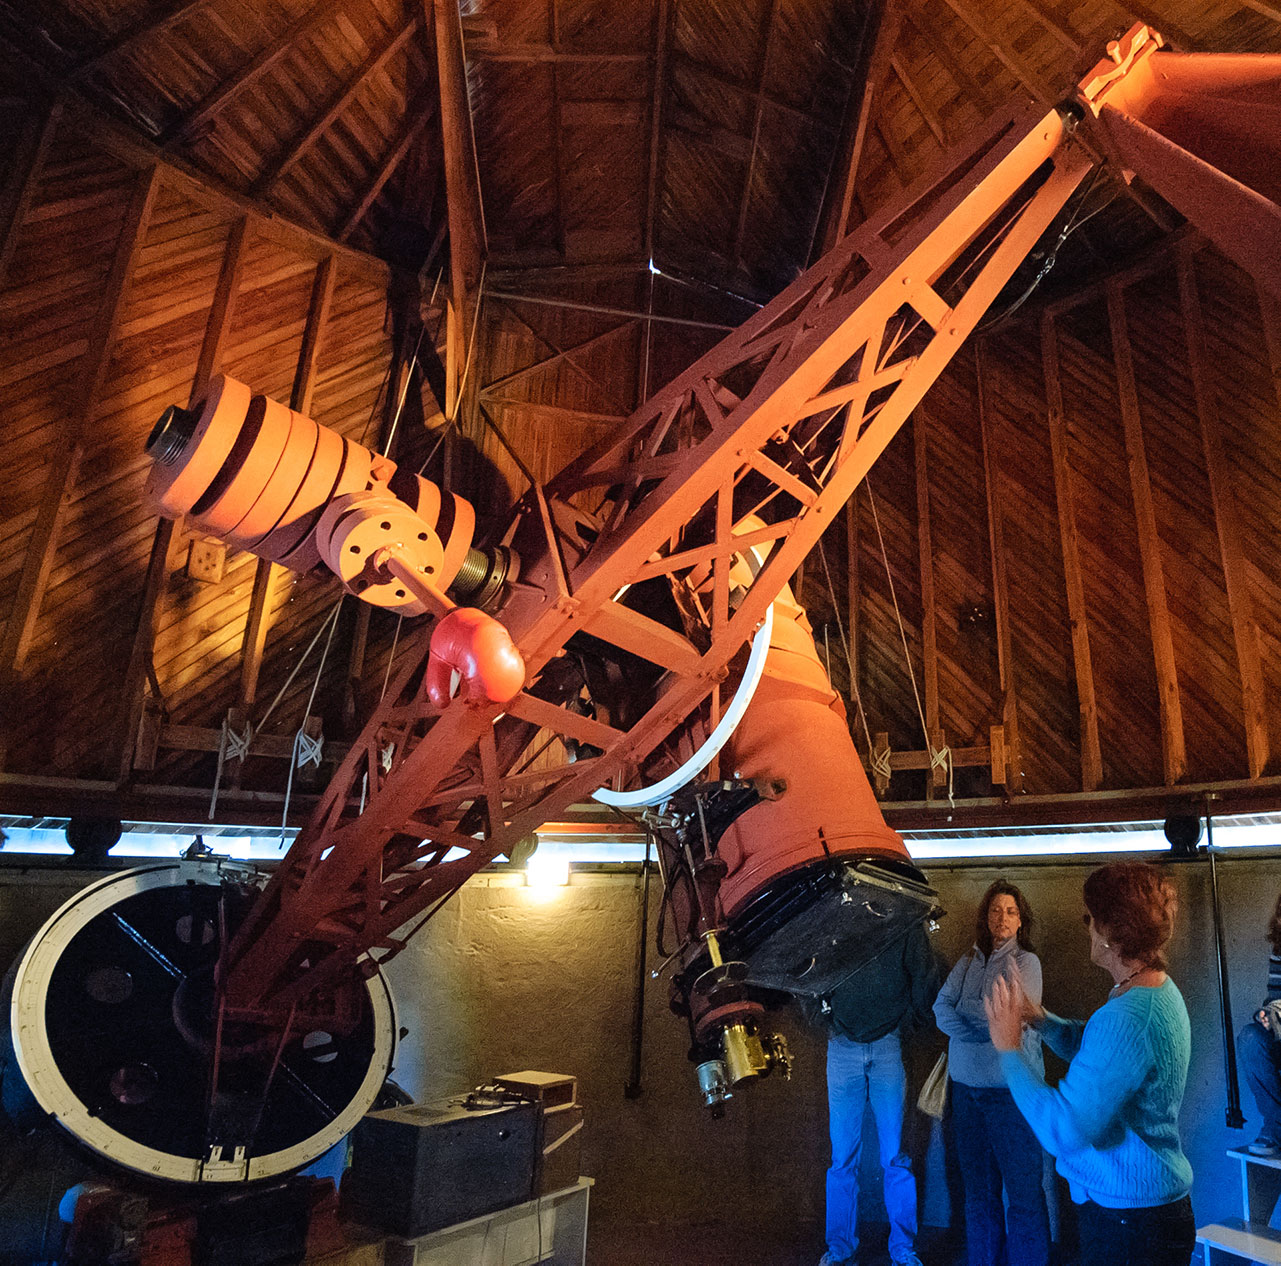 Tour guide inside the Lowell Observatory.